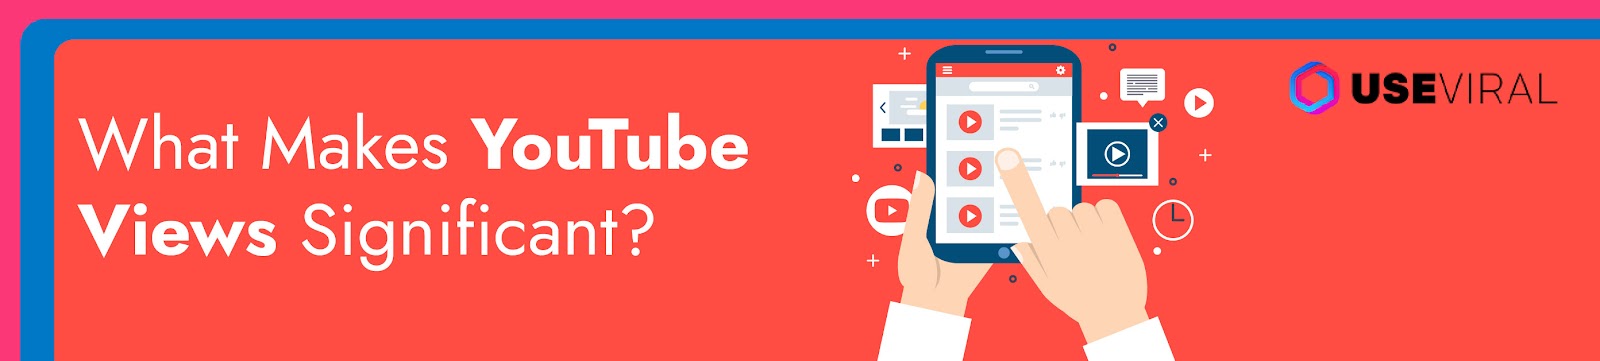 What Makes YouTube Views Significant?